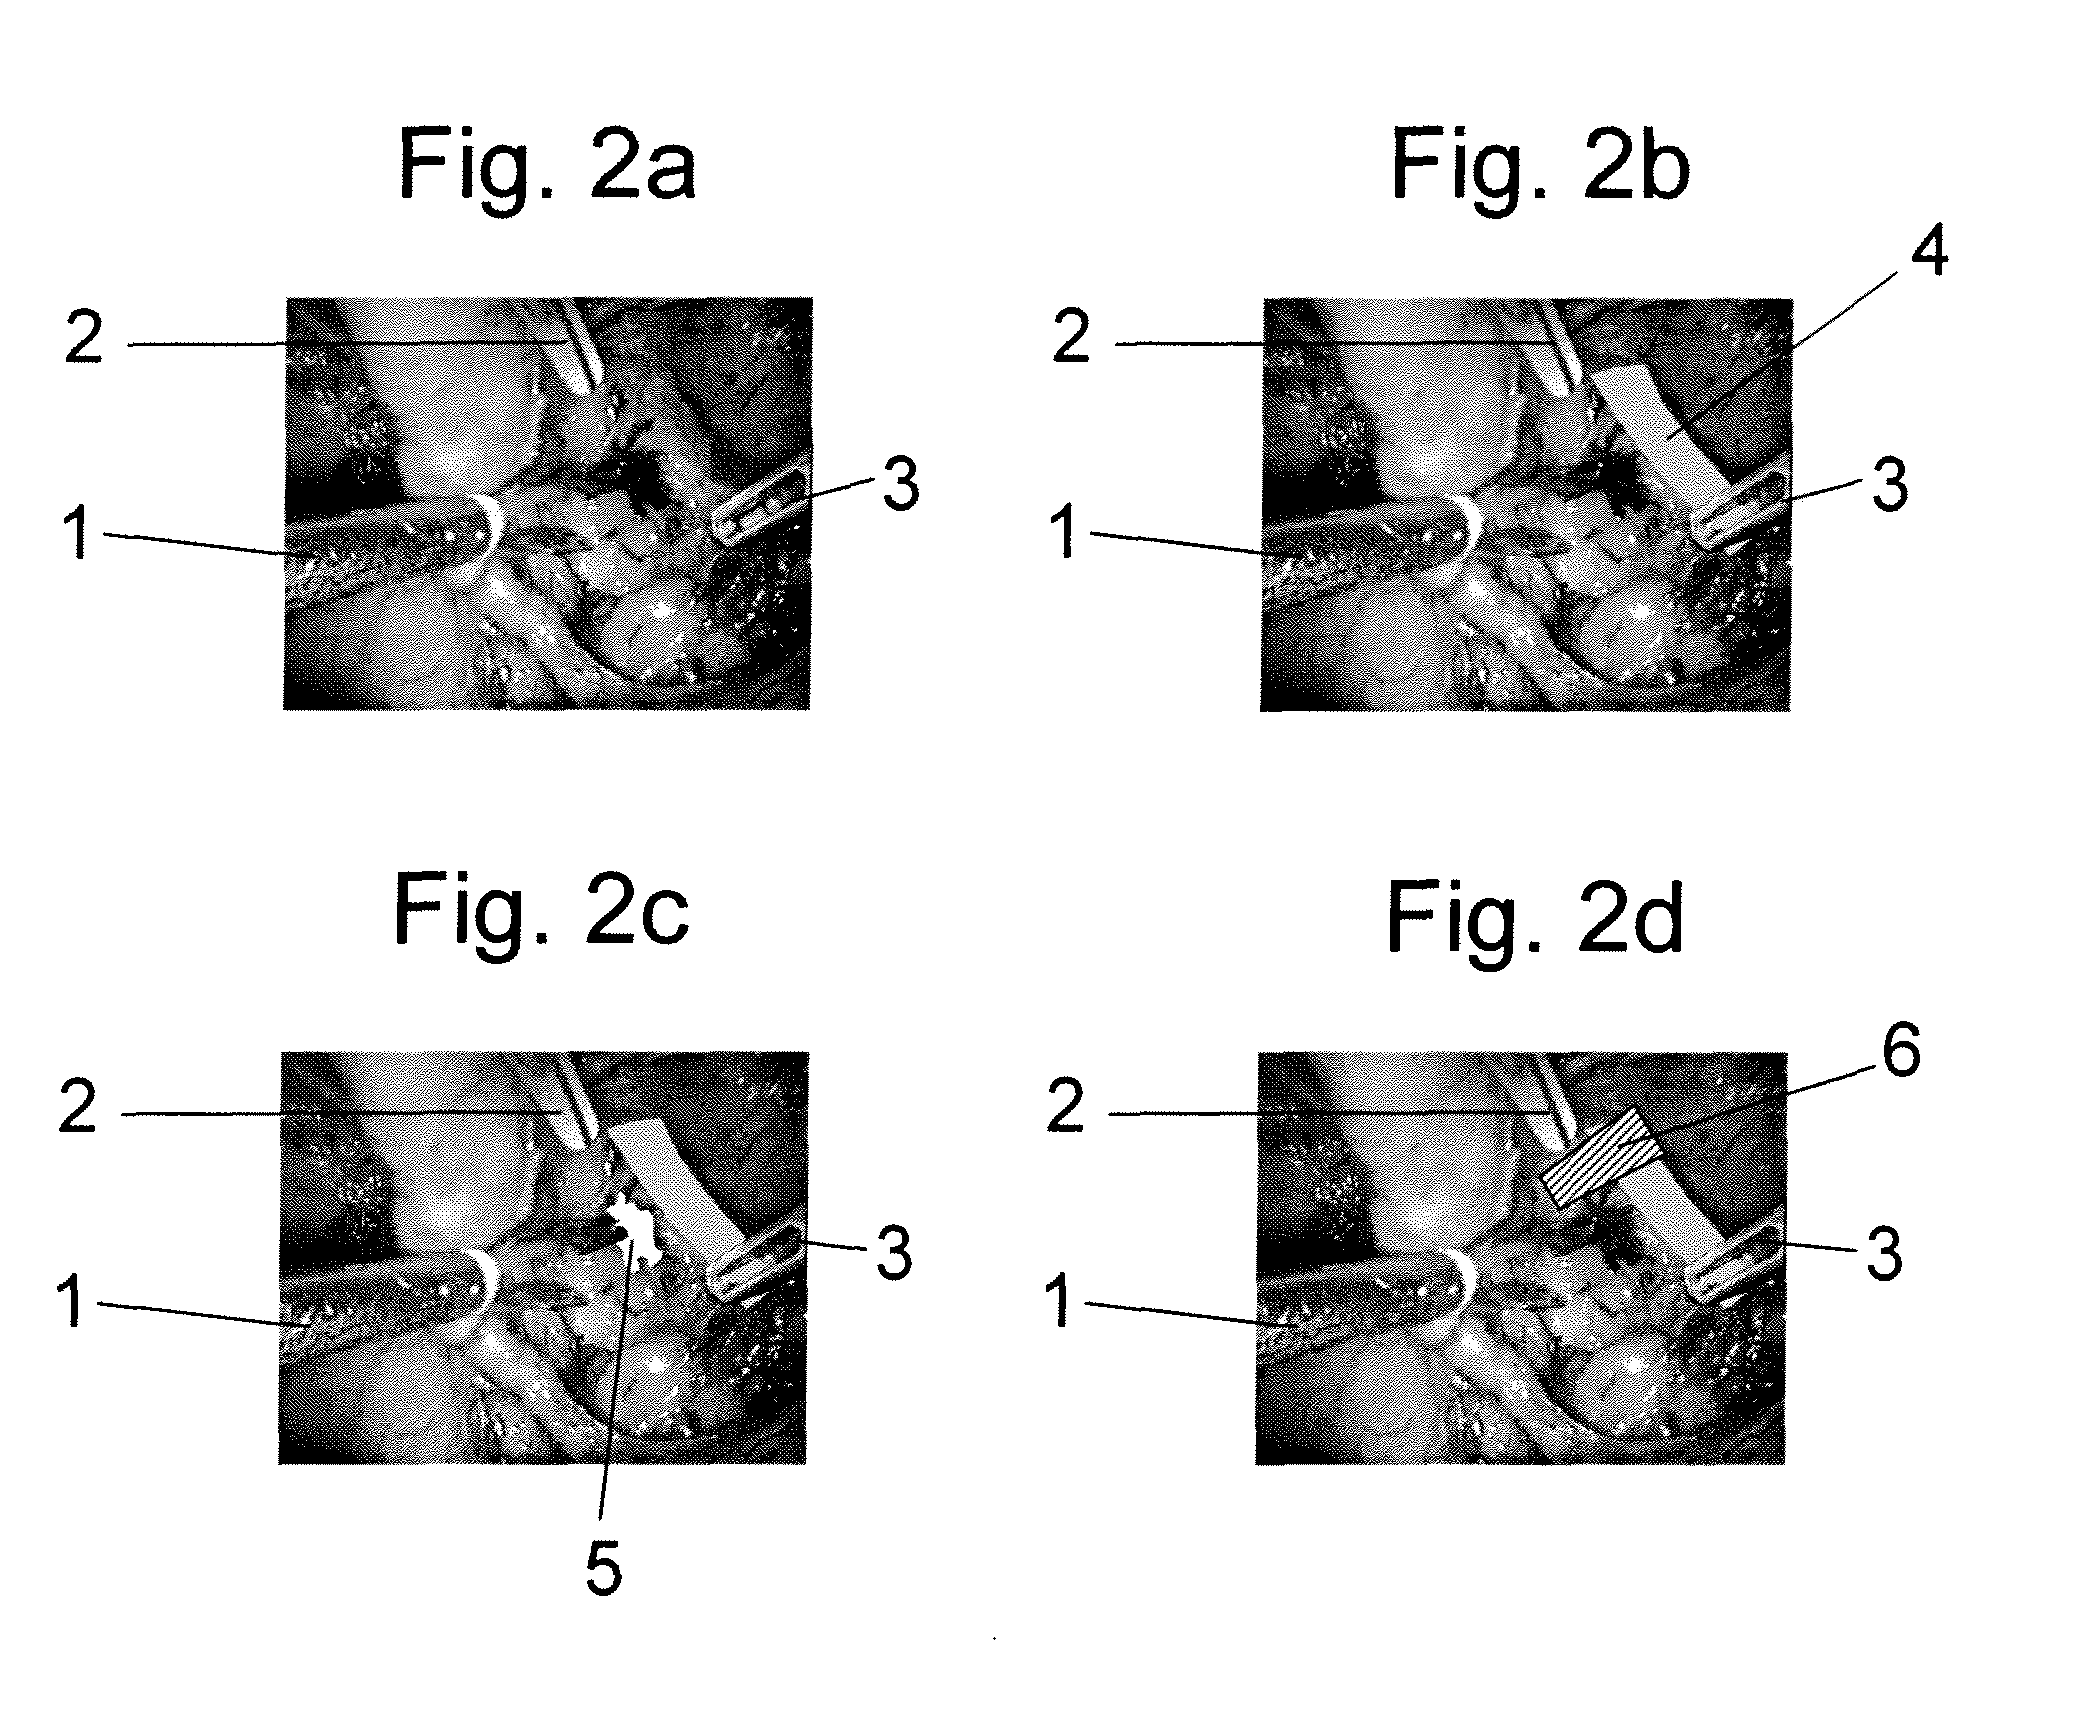 System and method for analysing a surgical operation by endoscopy